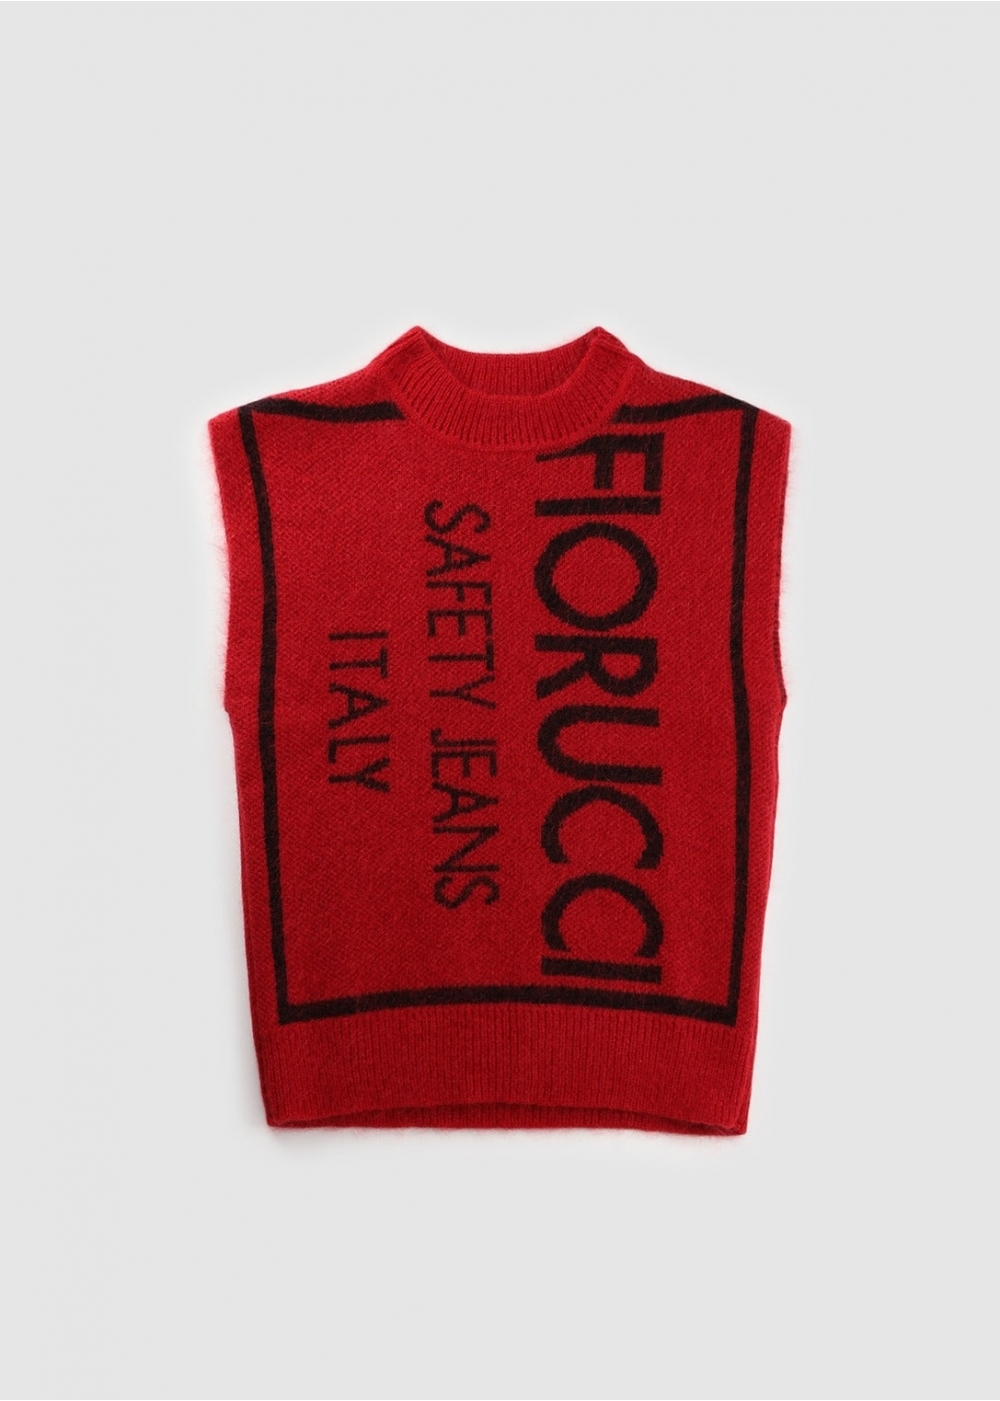 Fiorucci Womens Safety Knit Sweater Vest In Red